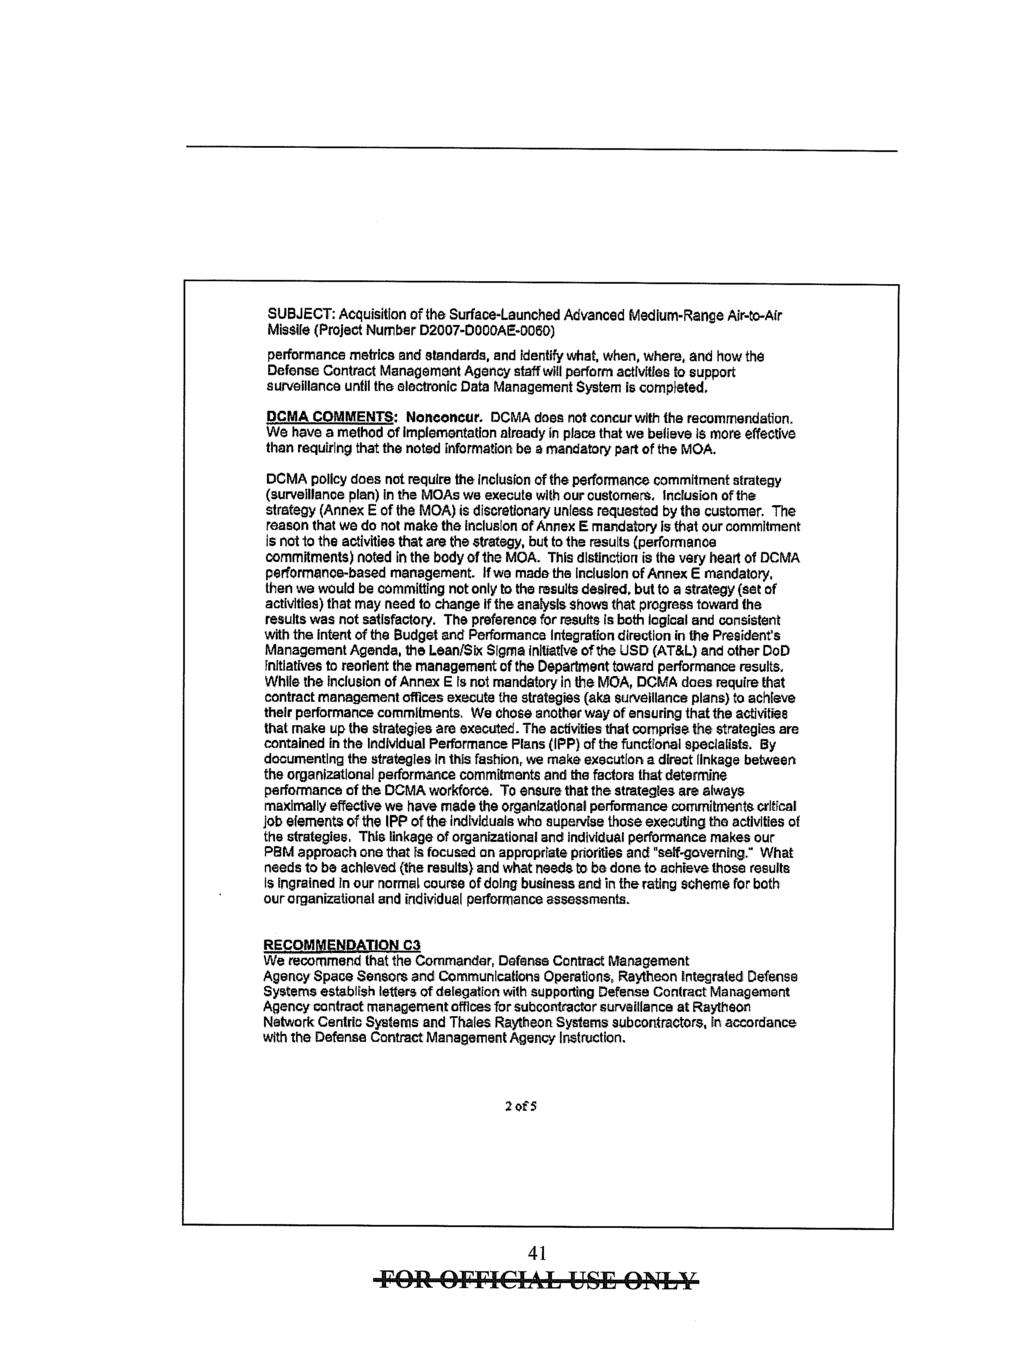 SUBJECT: Acquisition of the Surface-Launched Advanced Medium-Range Air-to-Air Missile (Project Number D2007-0000AE-0060) performance metrics and standards, and Identify what, when, where, and how the